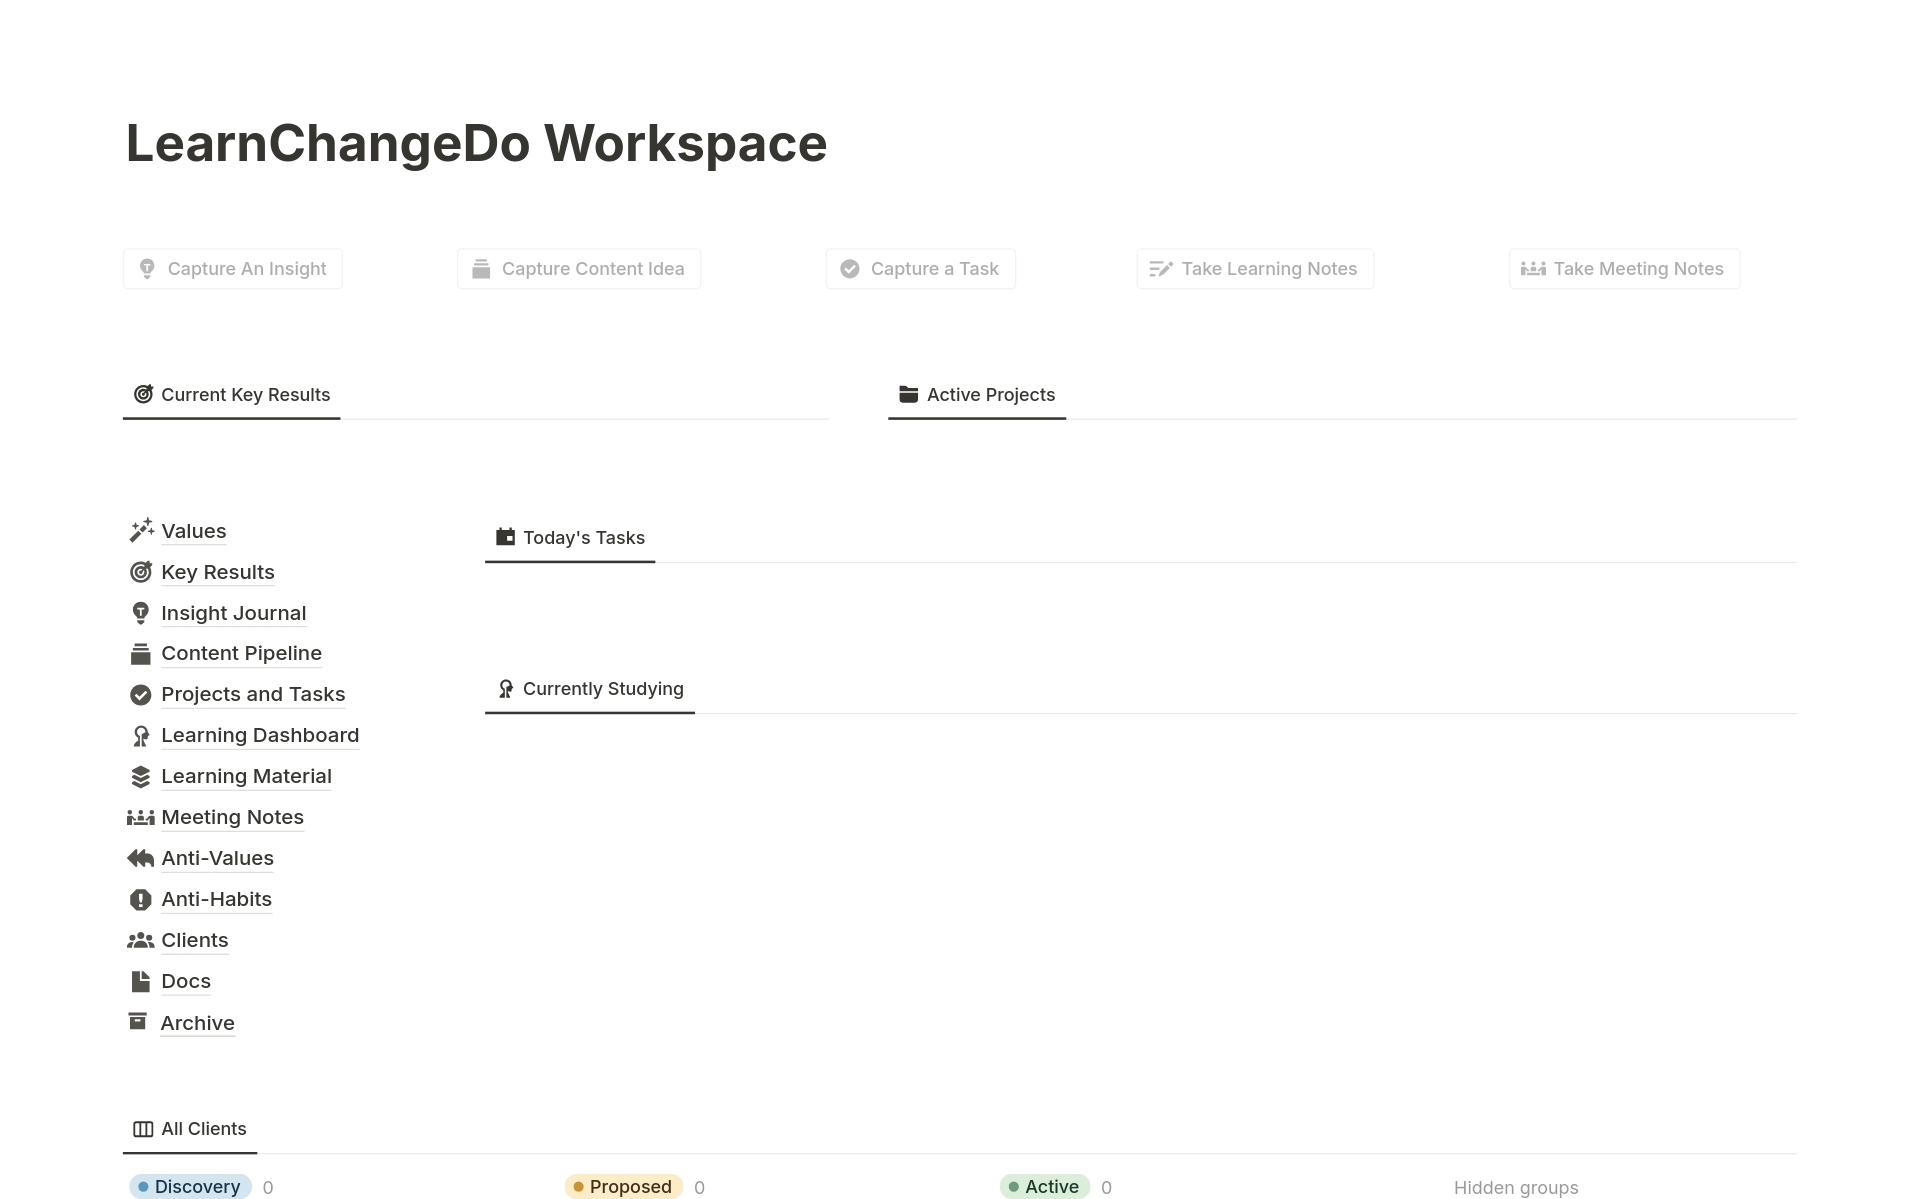 The LearnChangeDo Workspace is a complete knowledge and behavior management system for accelerated learning, behavior change, and impact-driven productivity. Use it to turn values, insights, and inspiration into key results, completed projects, and enhanced personal productivity.